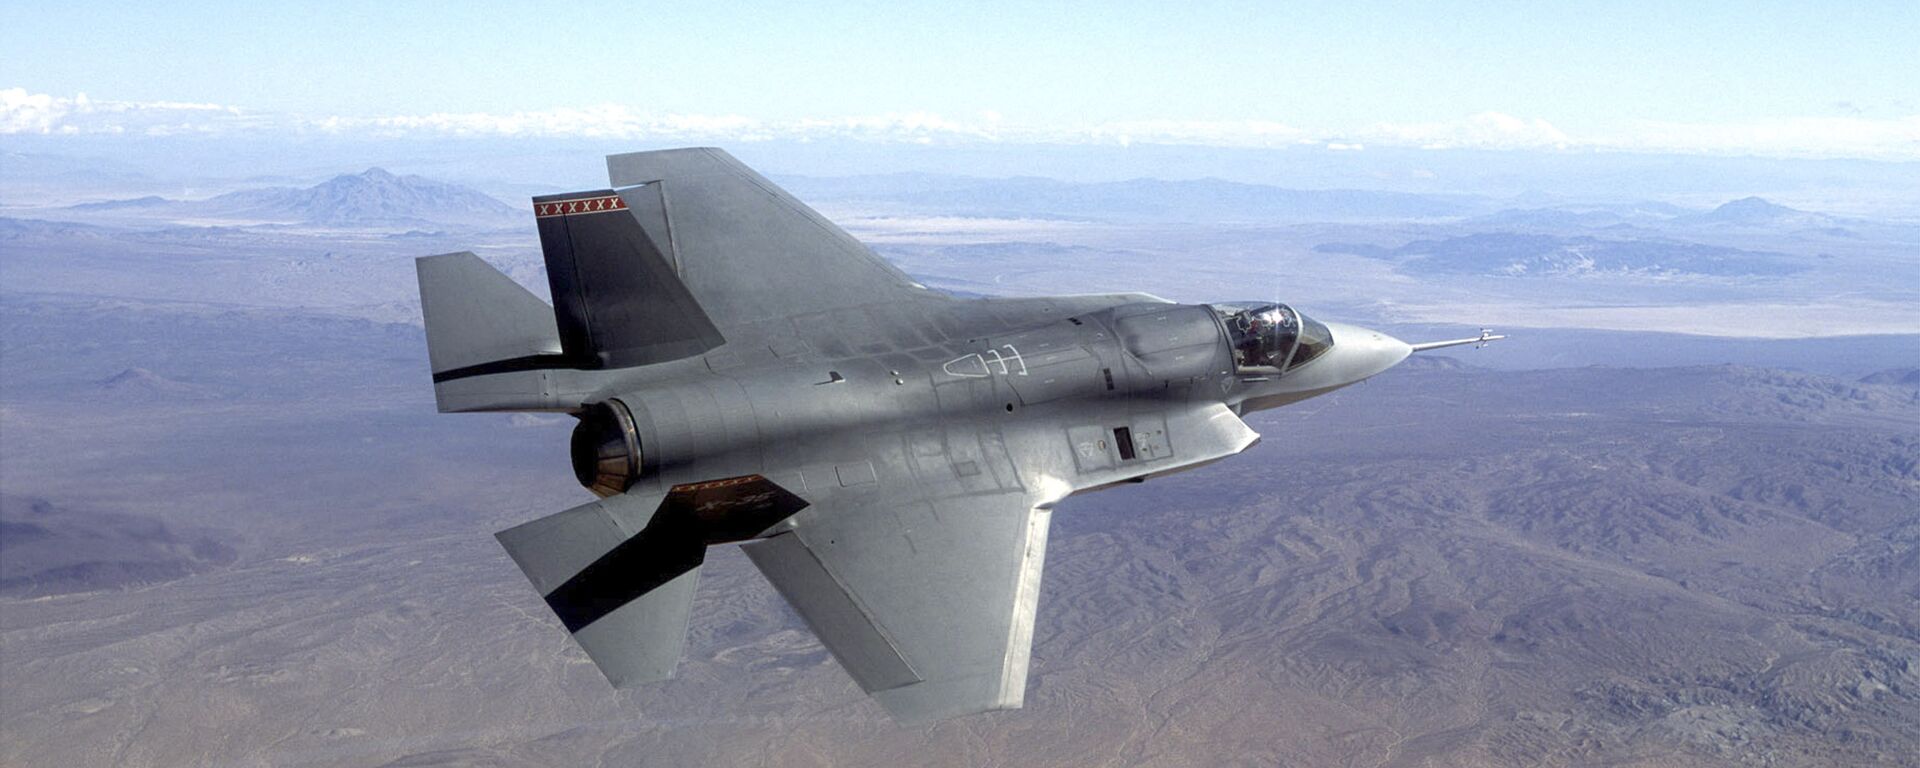 Israel to buy about 100 state-of-the-art F-35 Joint Strike Fighter warplanes from the United States - Sputnik International, 1920, 30.12.2021